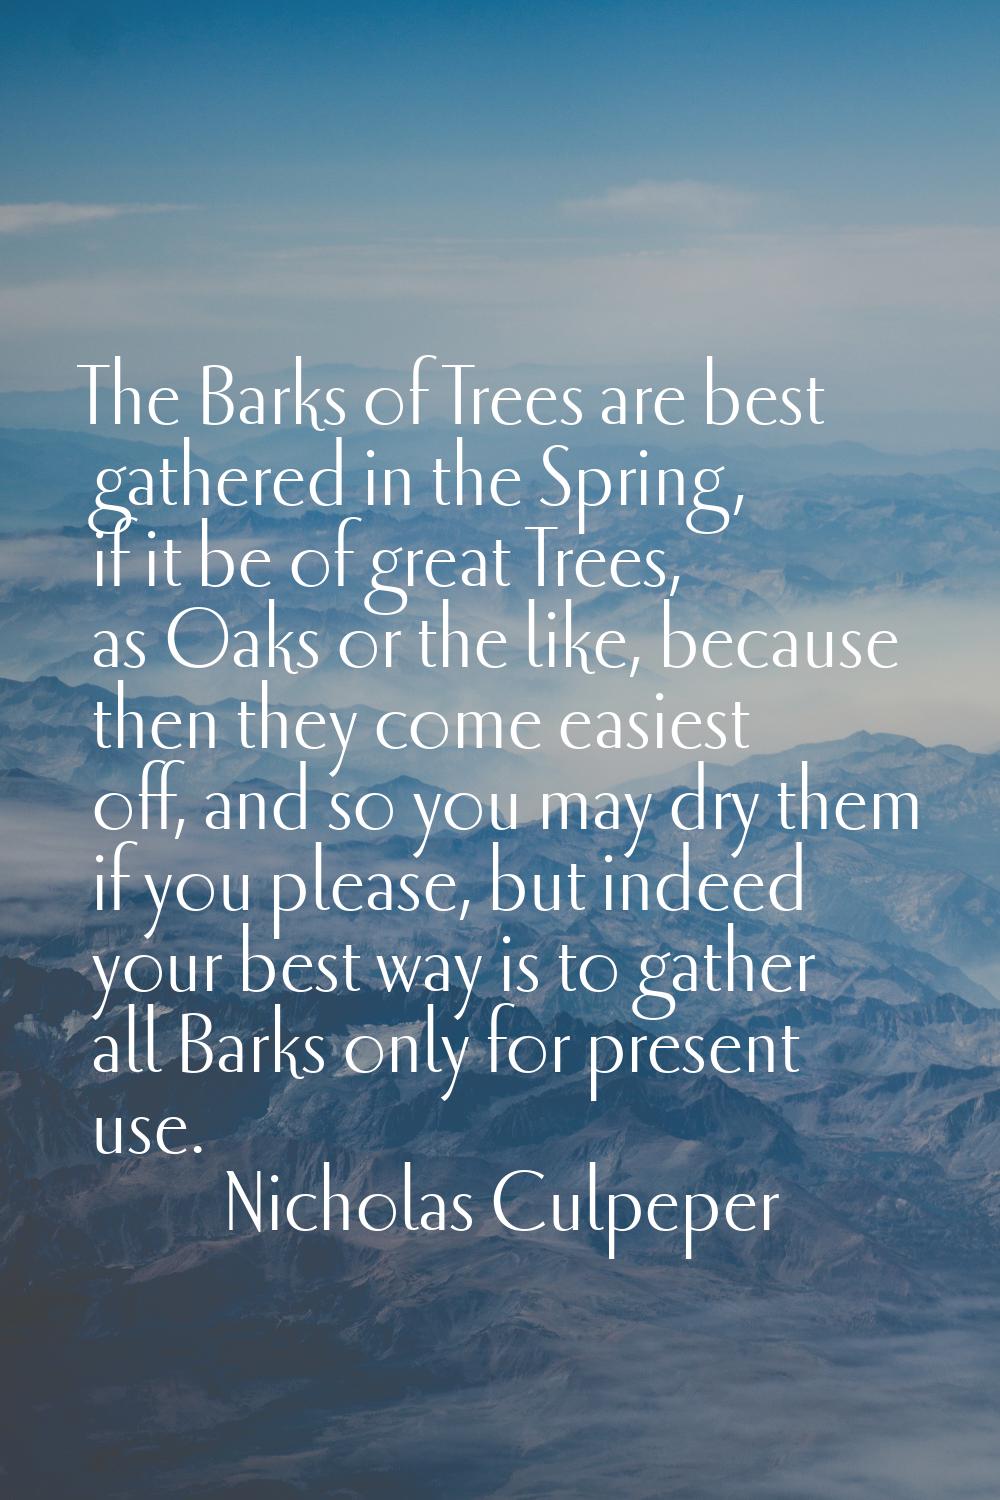 The Barks of Trees are best gathered in the Spring, if it be of great Trees, as Oaks or the like, b